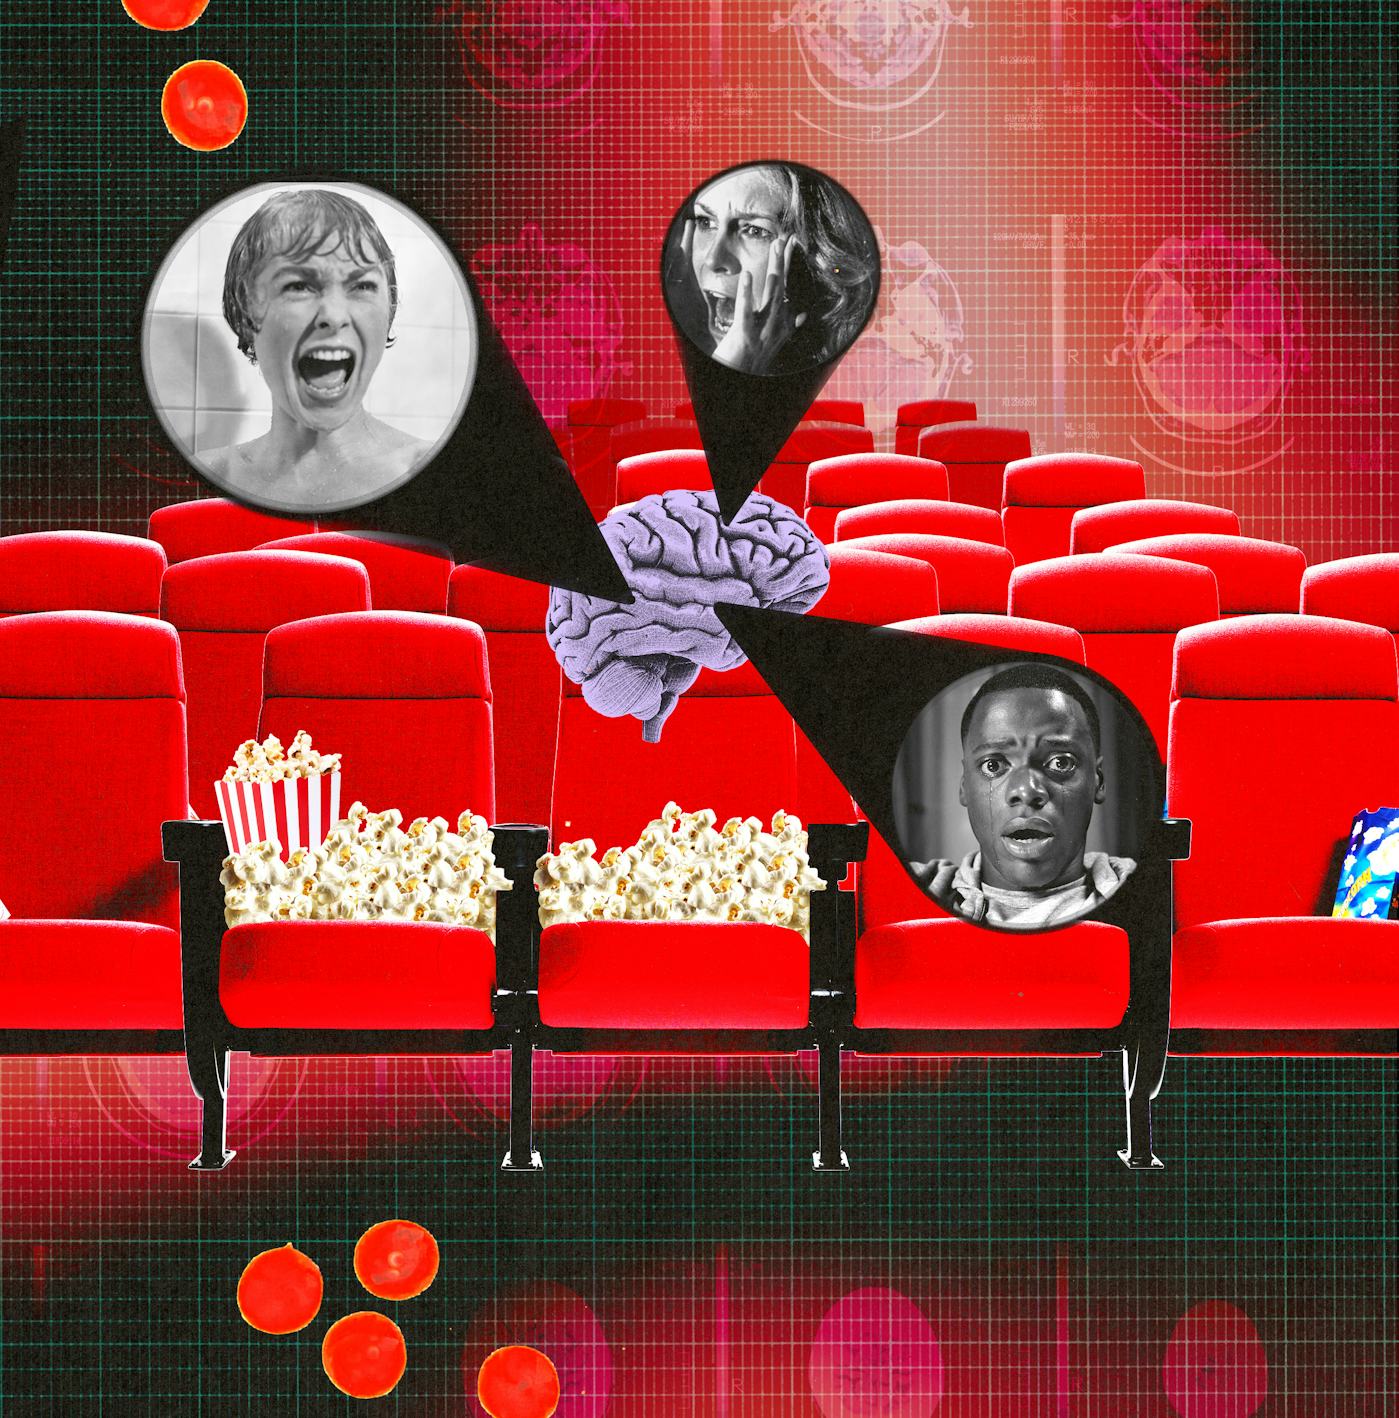 Collage of a cinema setting with red seats, popcorn, and faces in spotlight beams on a textured red background.